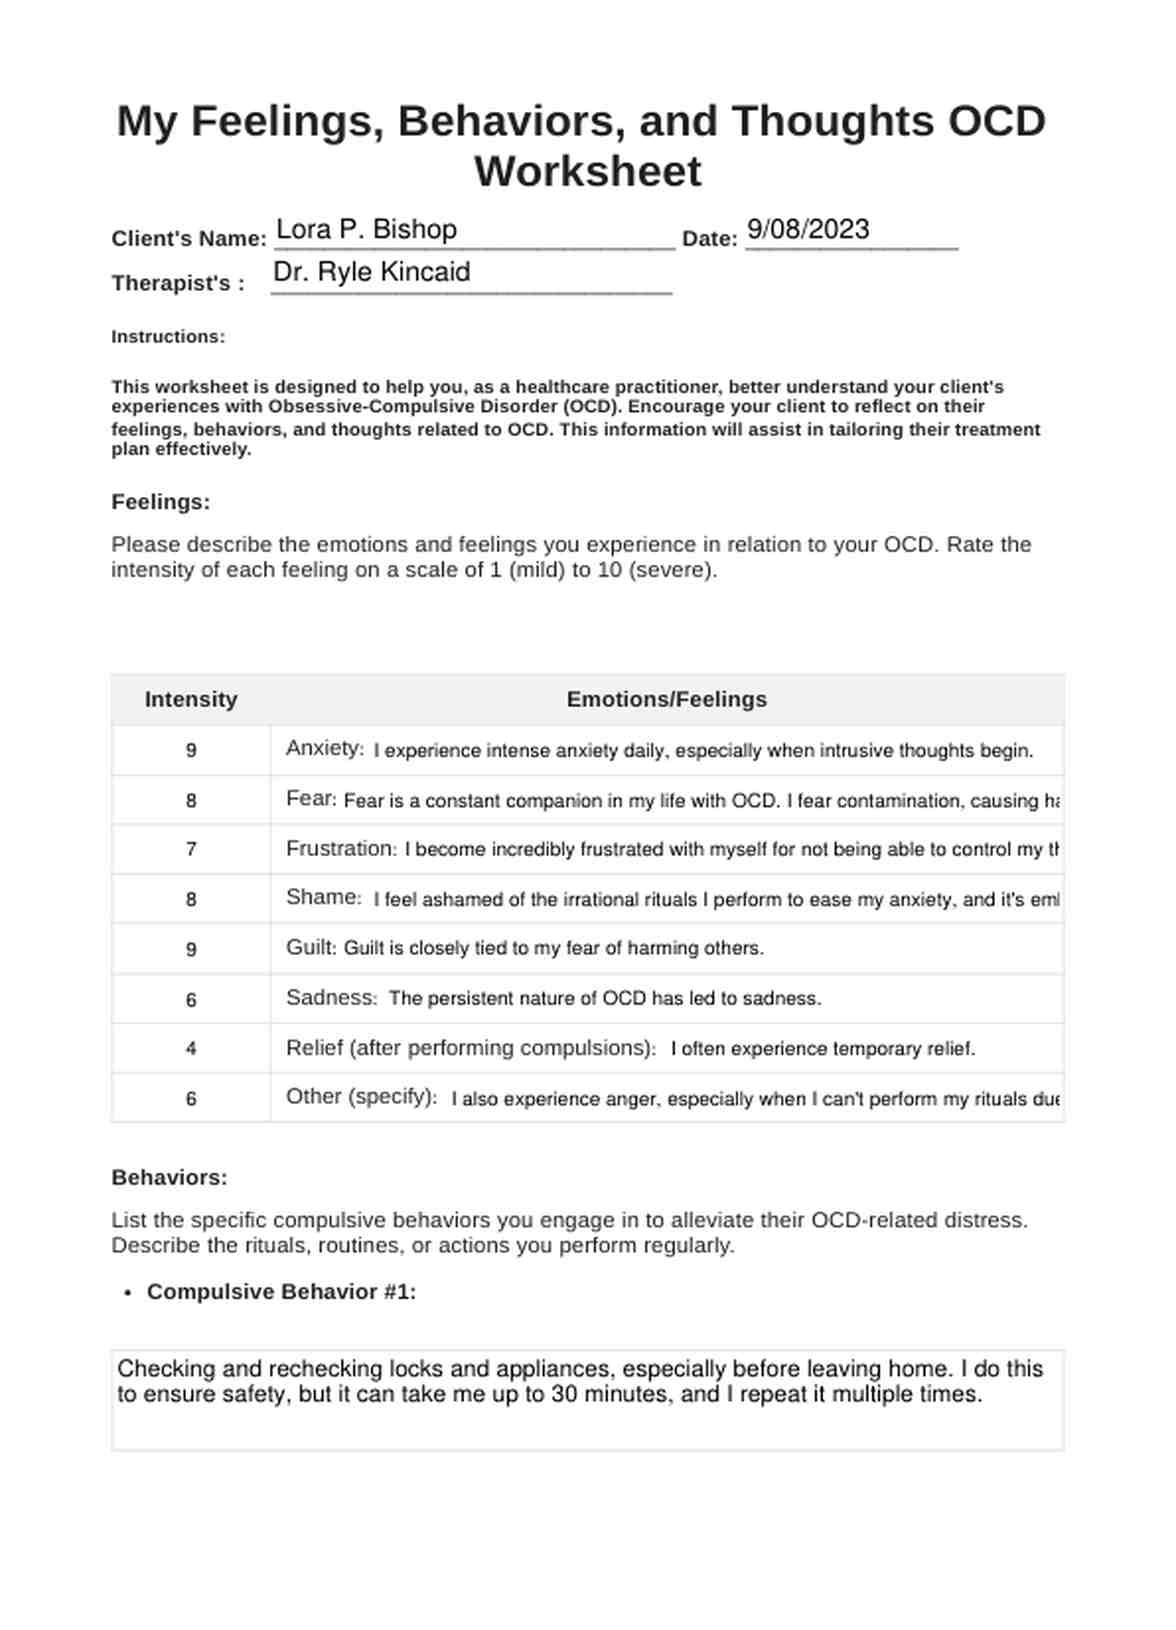 My Feelings, Behaviors, and Thoughts OCD Worksheet PDF Example